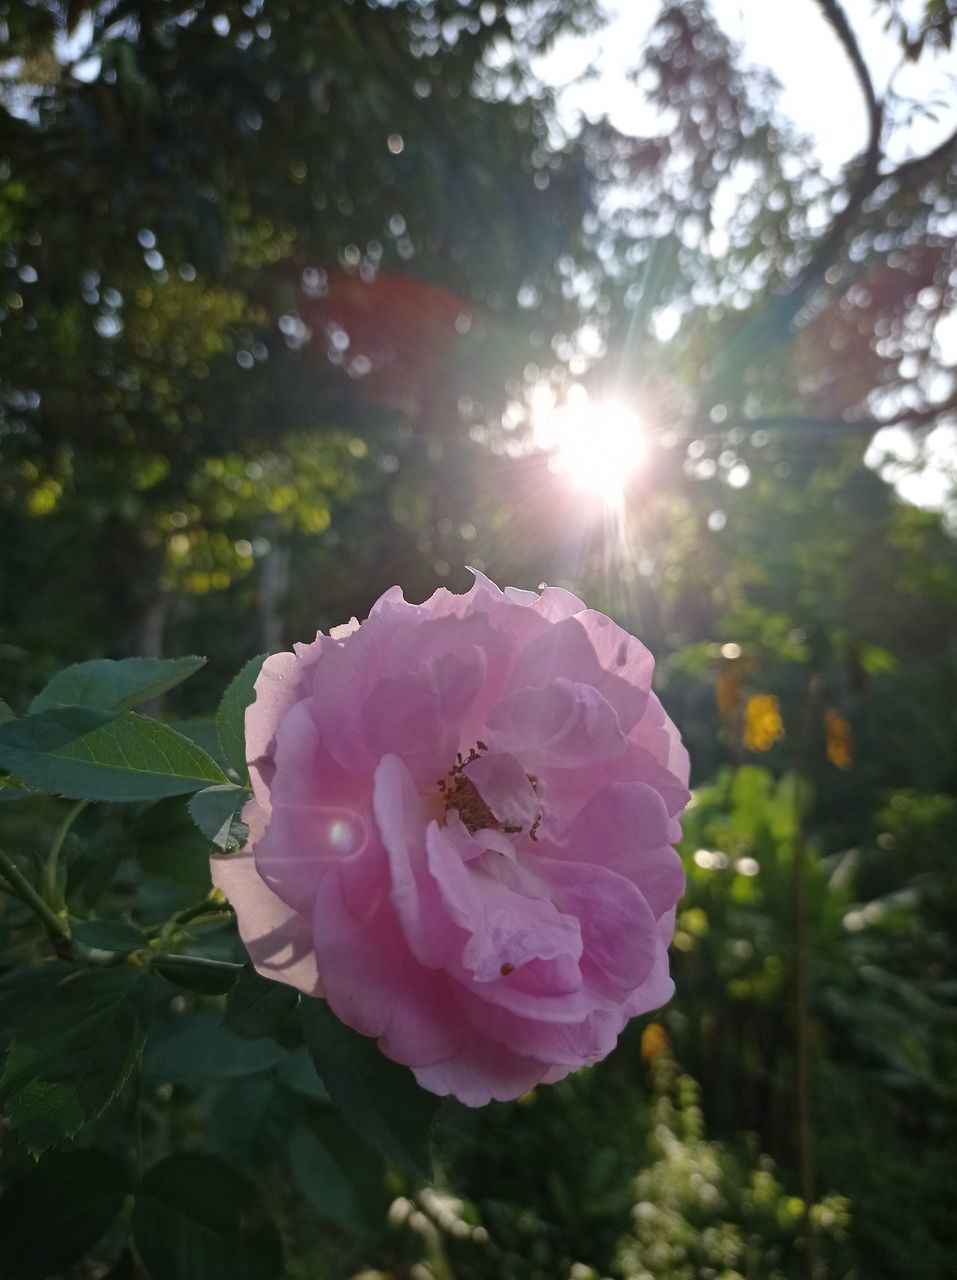 plant, flower, flowering plant, beauty in nature, freshness, pink, nature, petal, growth, flower head, rose, sunlight, inflorescence, fragility, close-up, tree, lens flare, blossom, plant part, no people, outdoors, sunbeam, leaf, focus on foreground, day, garden roses, springtime